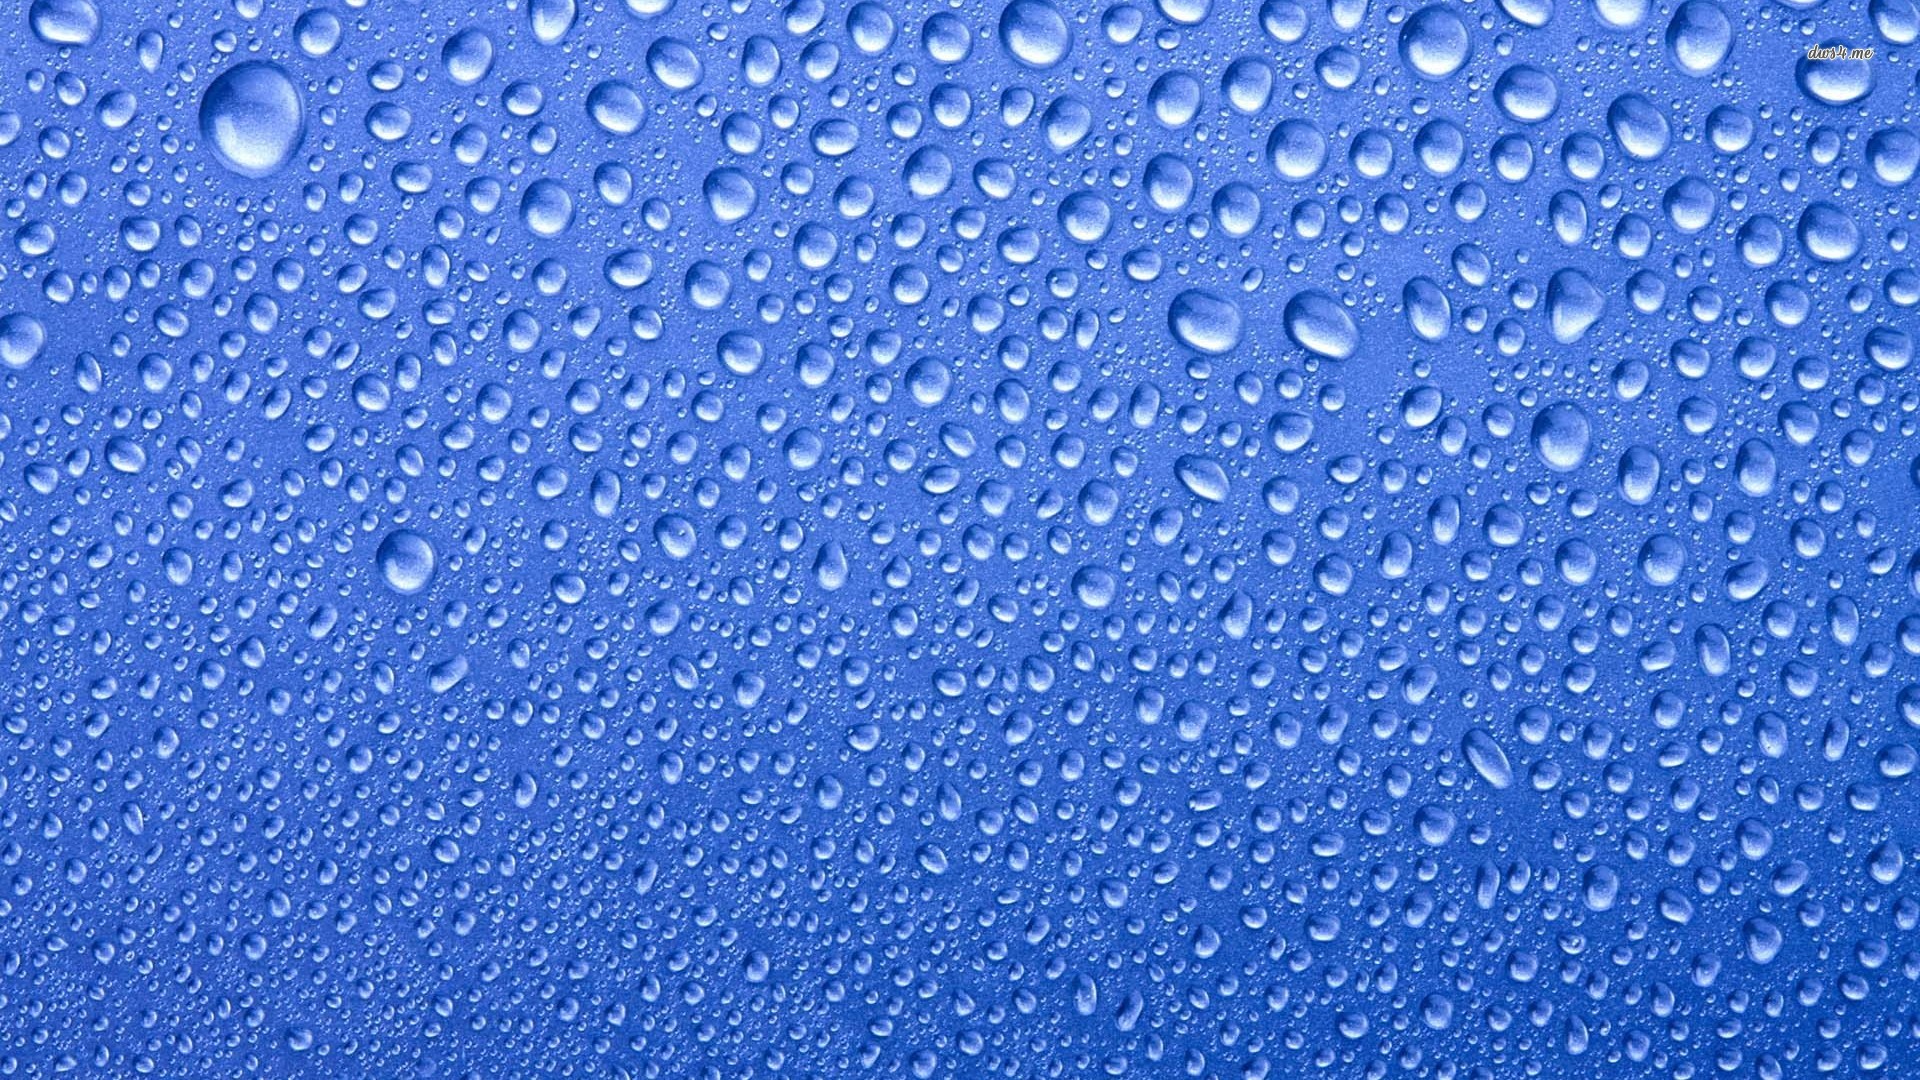 Blue Water Drops Wallpapers, Top HD Blue Water Drops Backgrounds ...